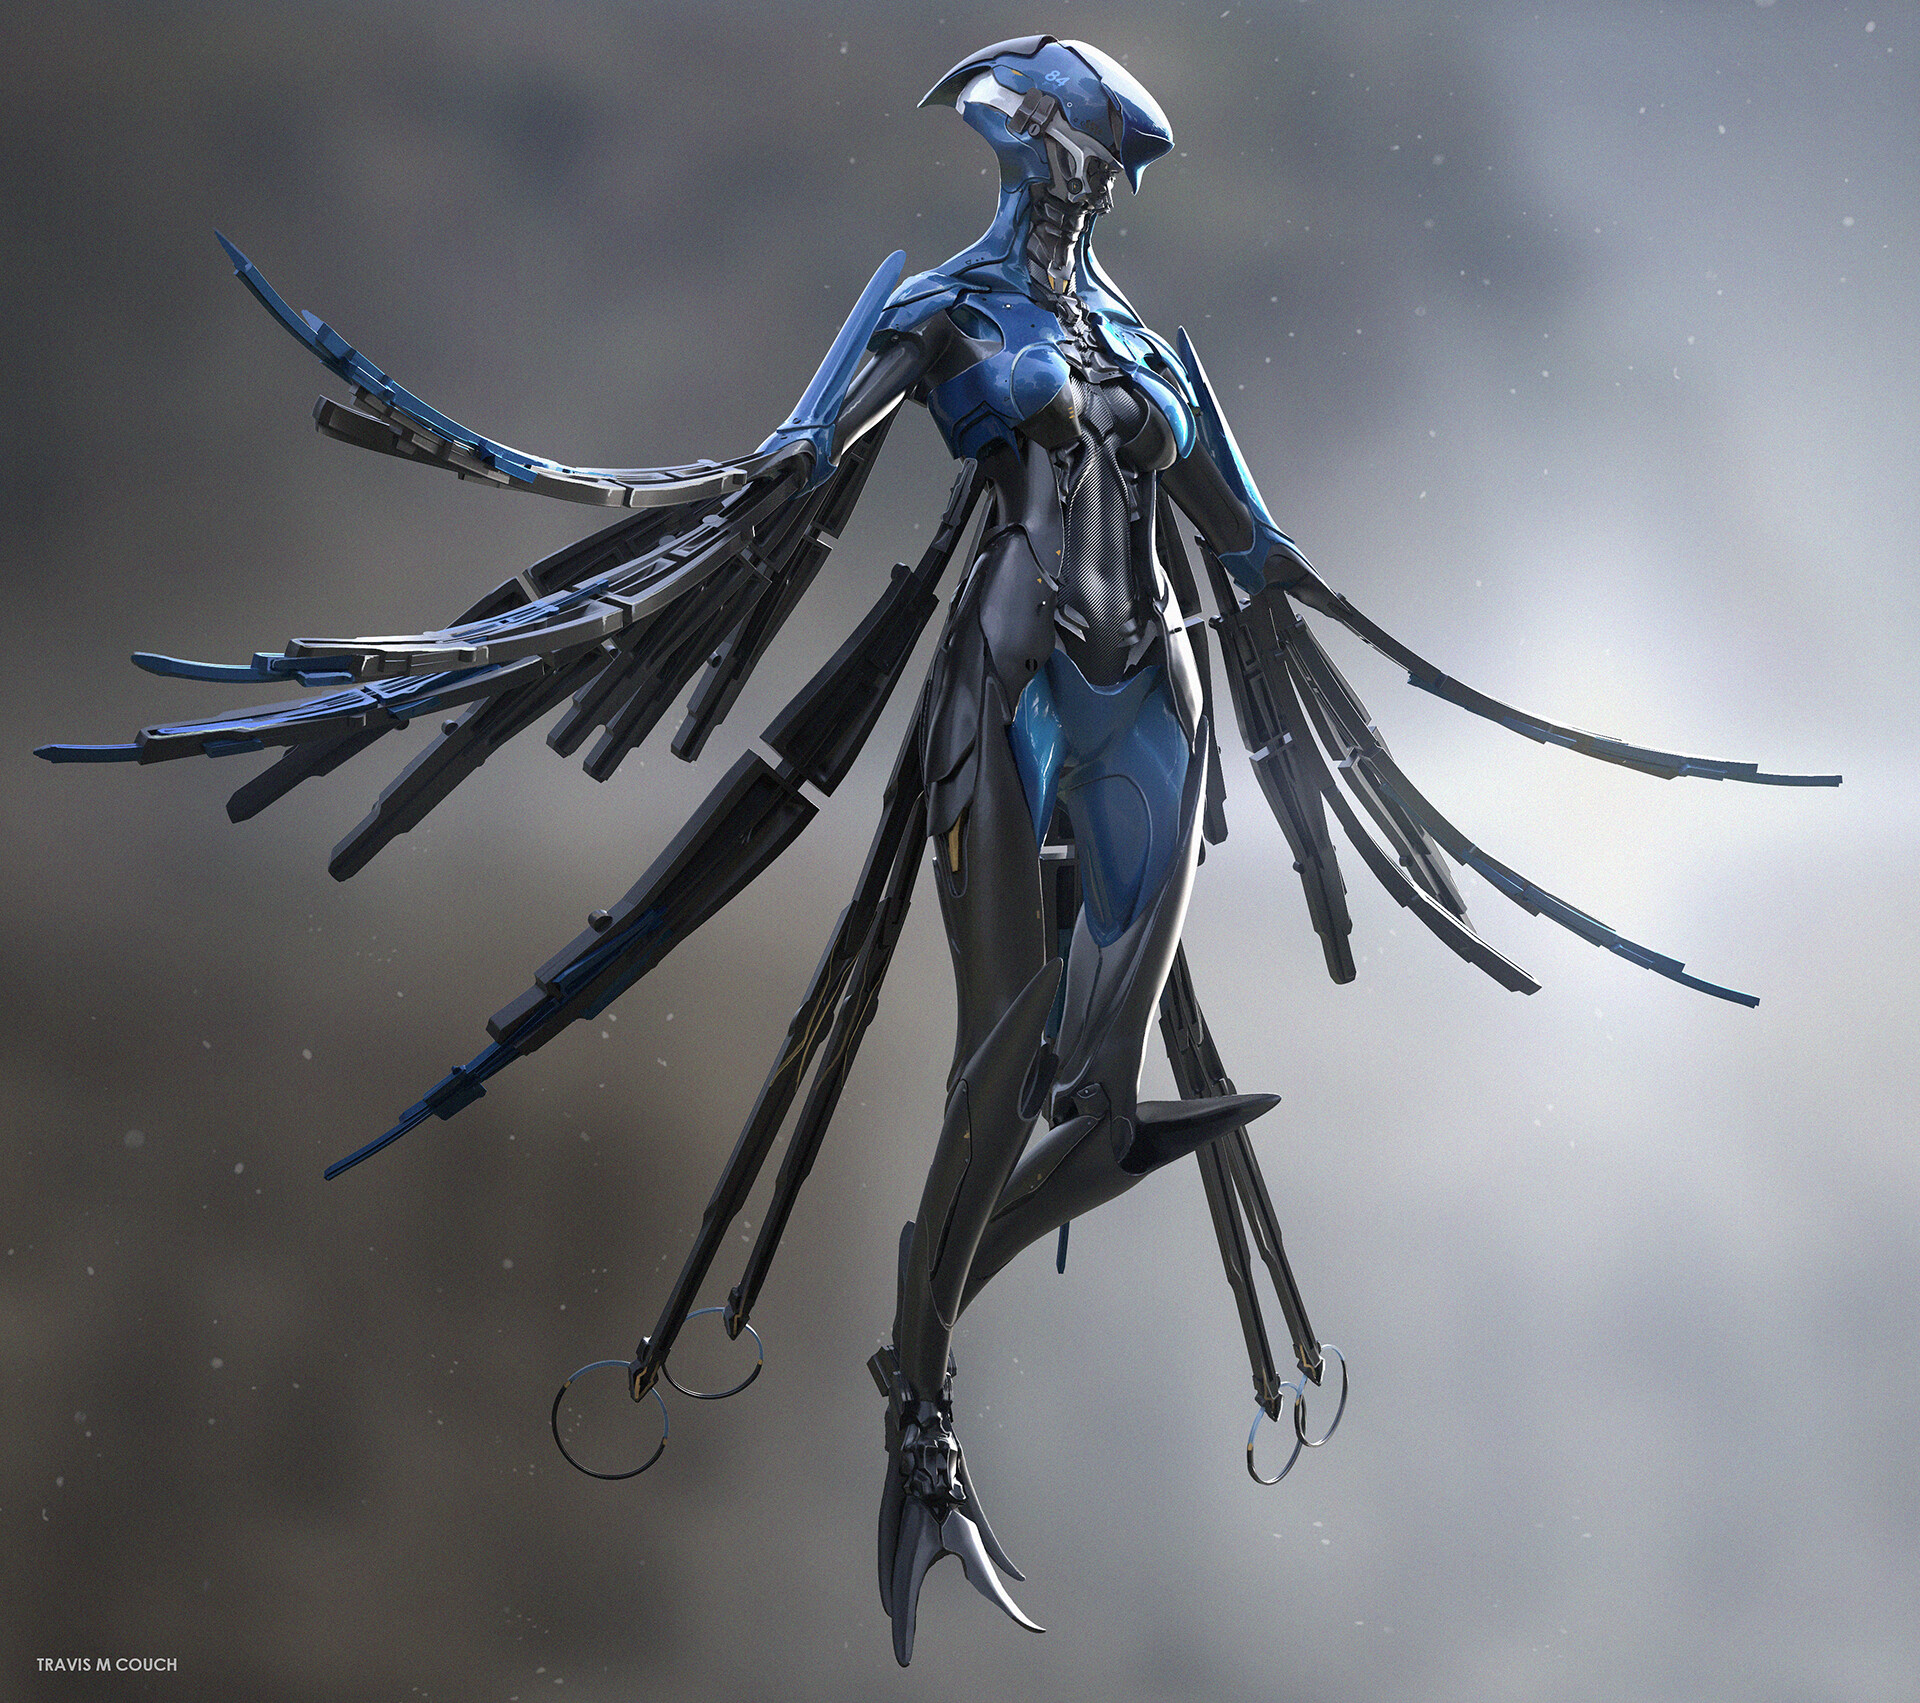 Bird Cyborg by Travis M Couch pic